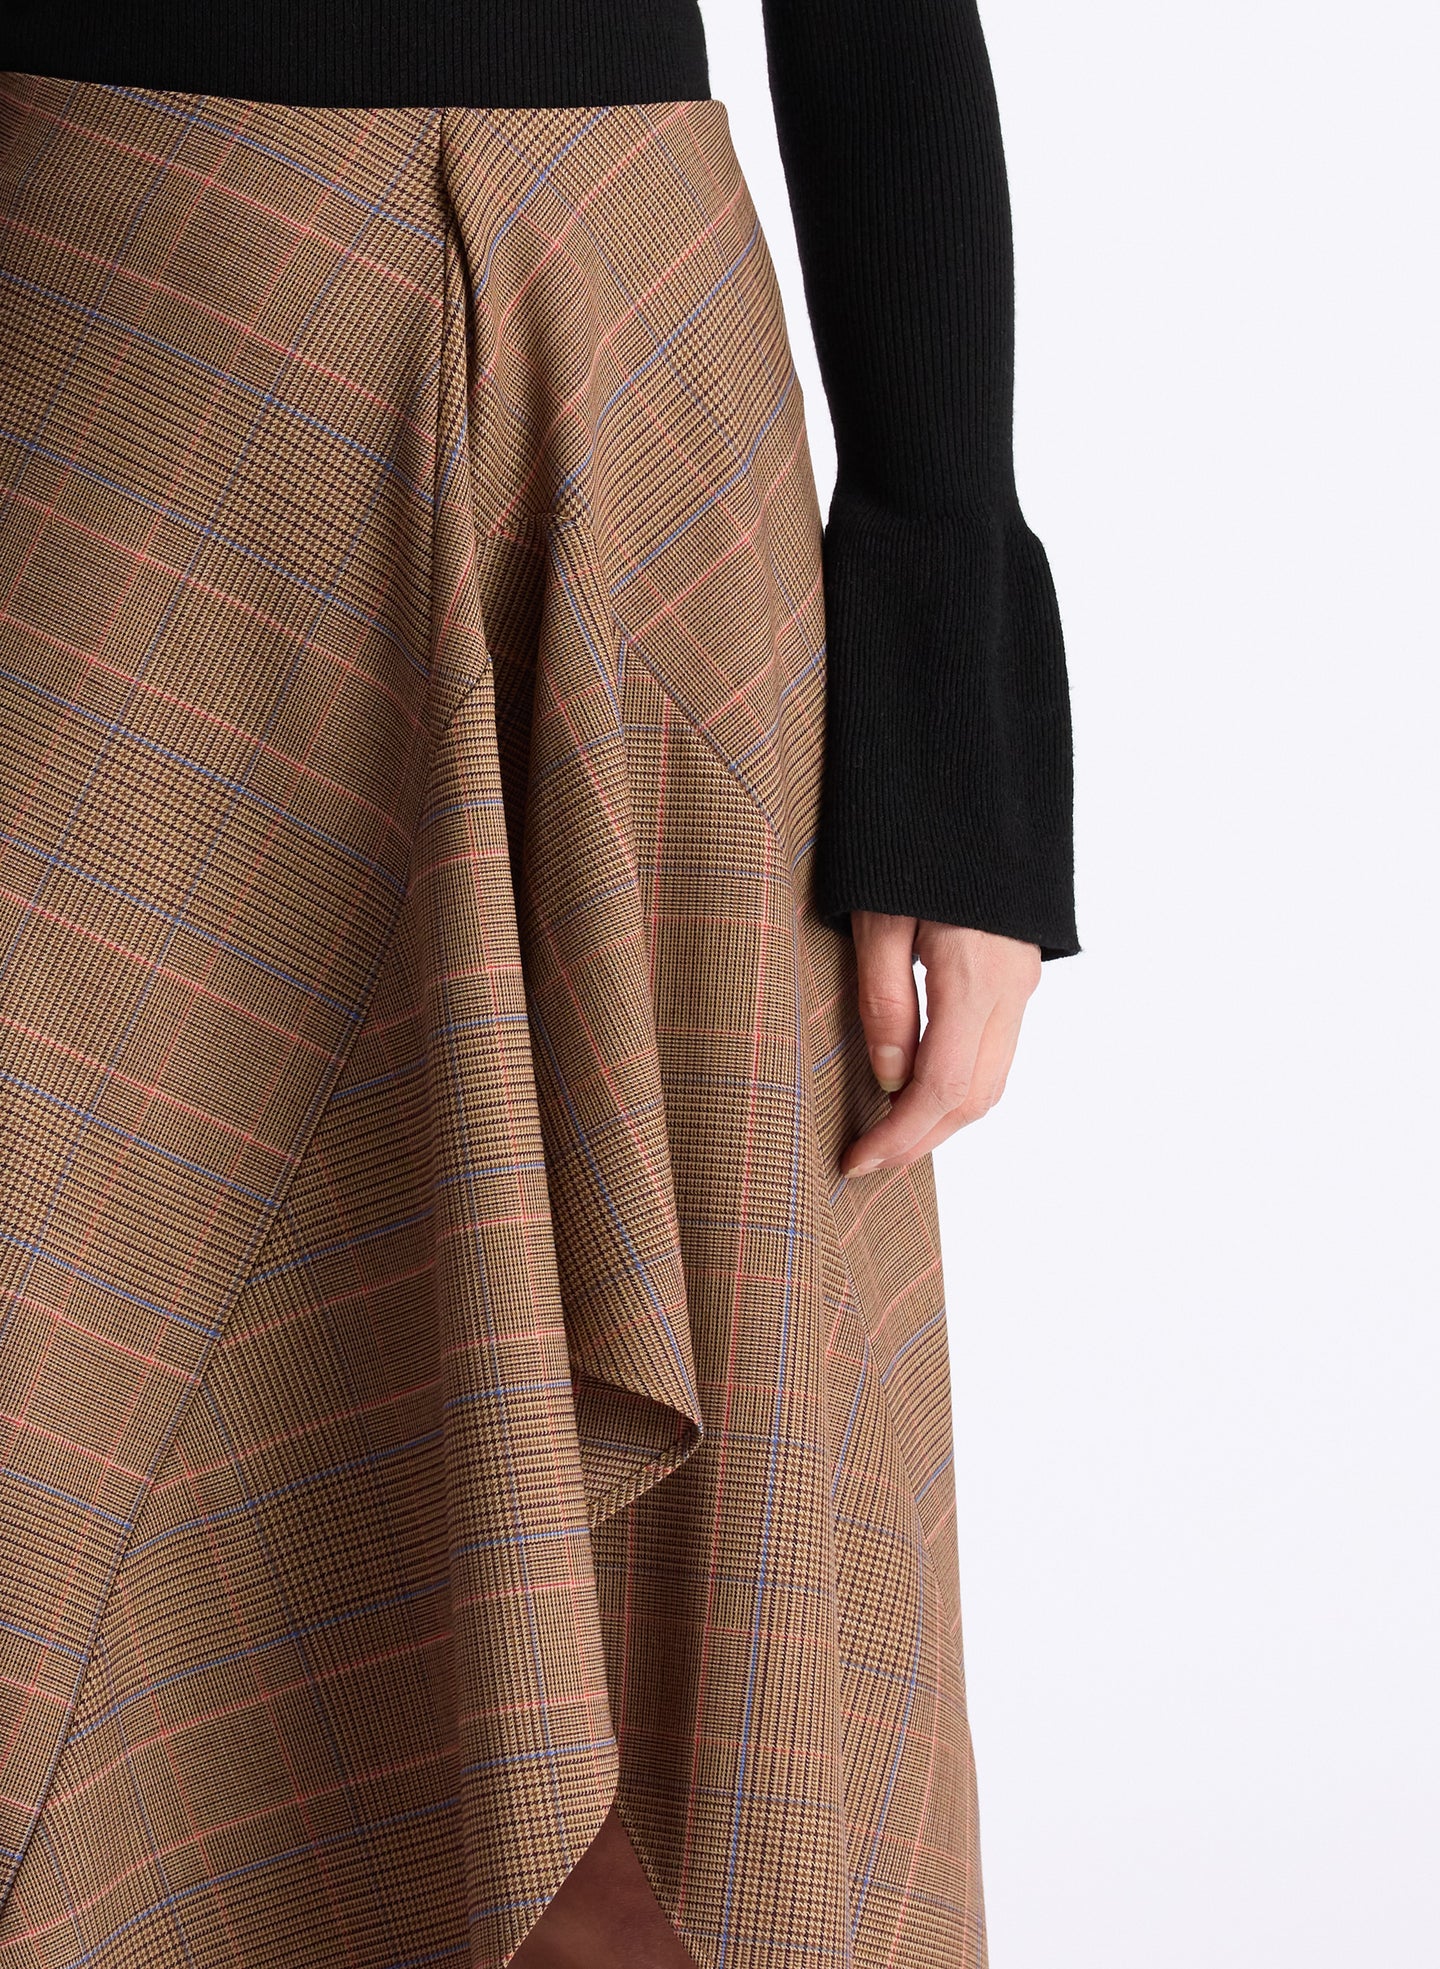 detail  view of woman wearing black sweater and brown plaid asymmetric midi skirt